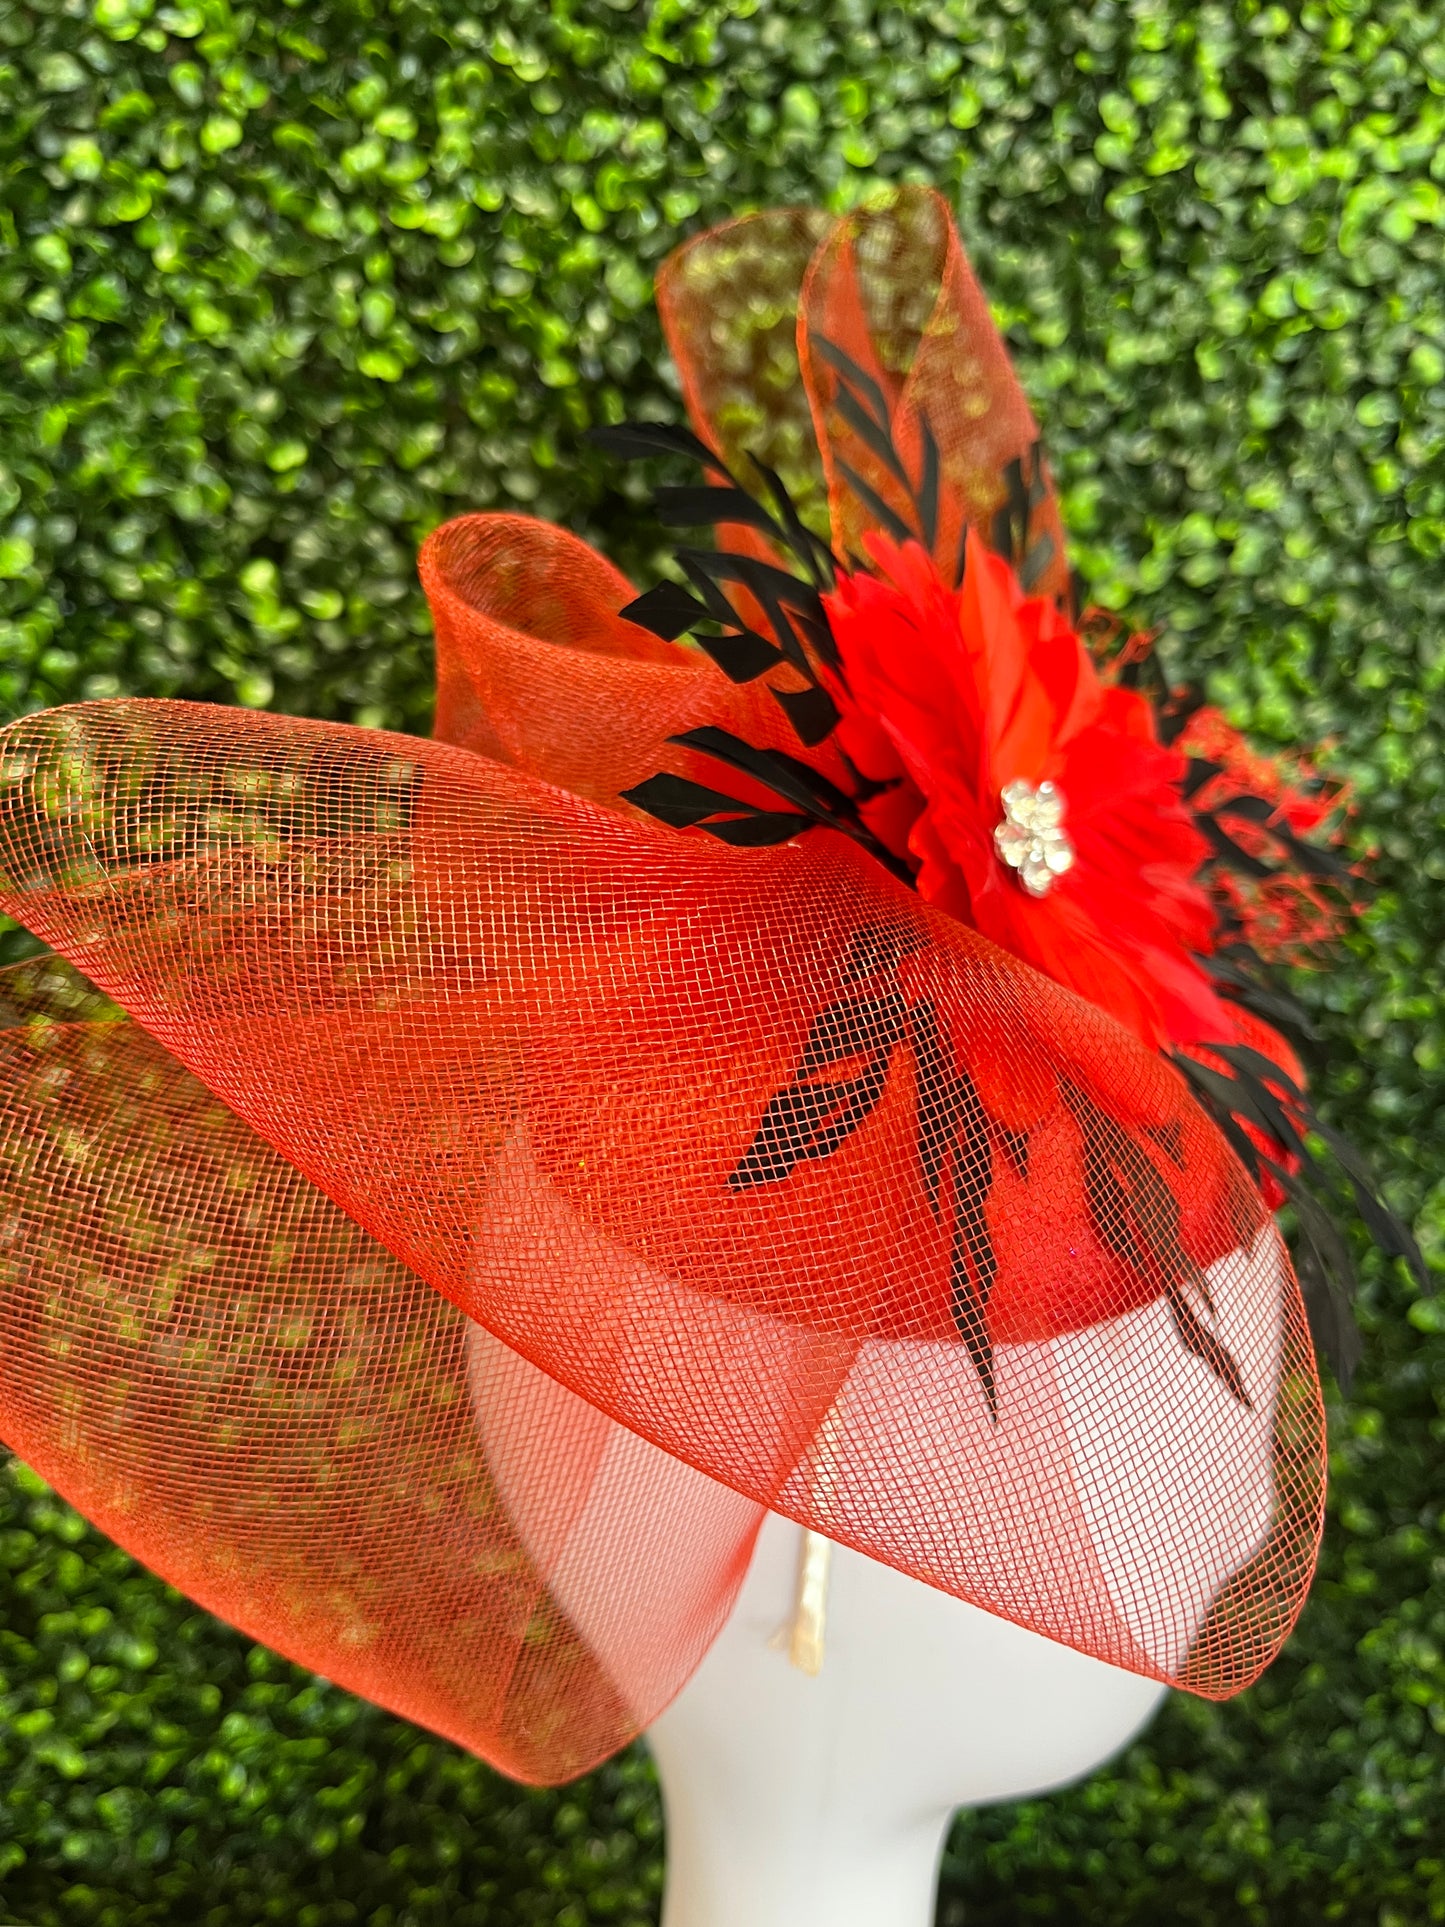 Red with Black Feather Flower Fascinator Hat